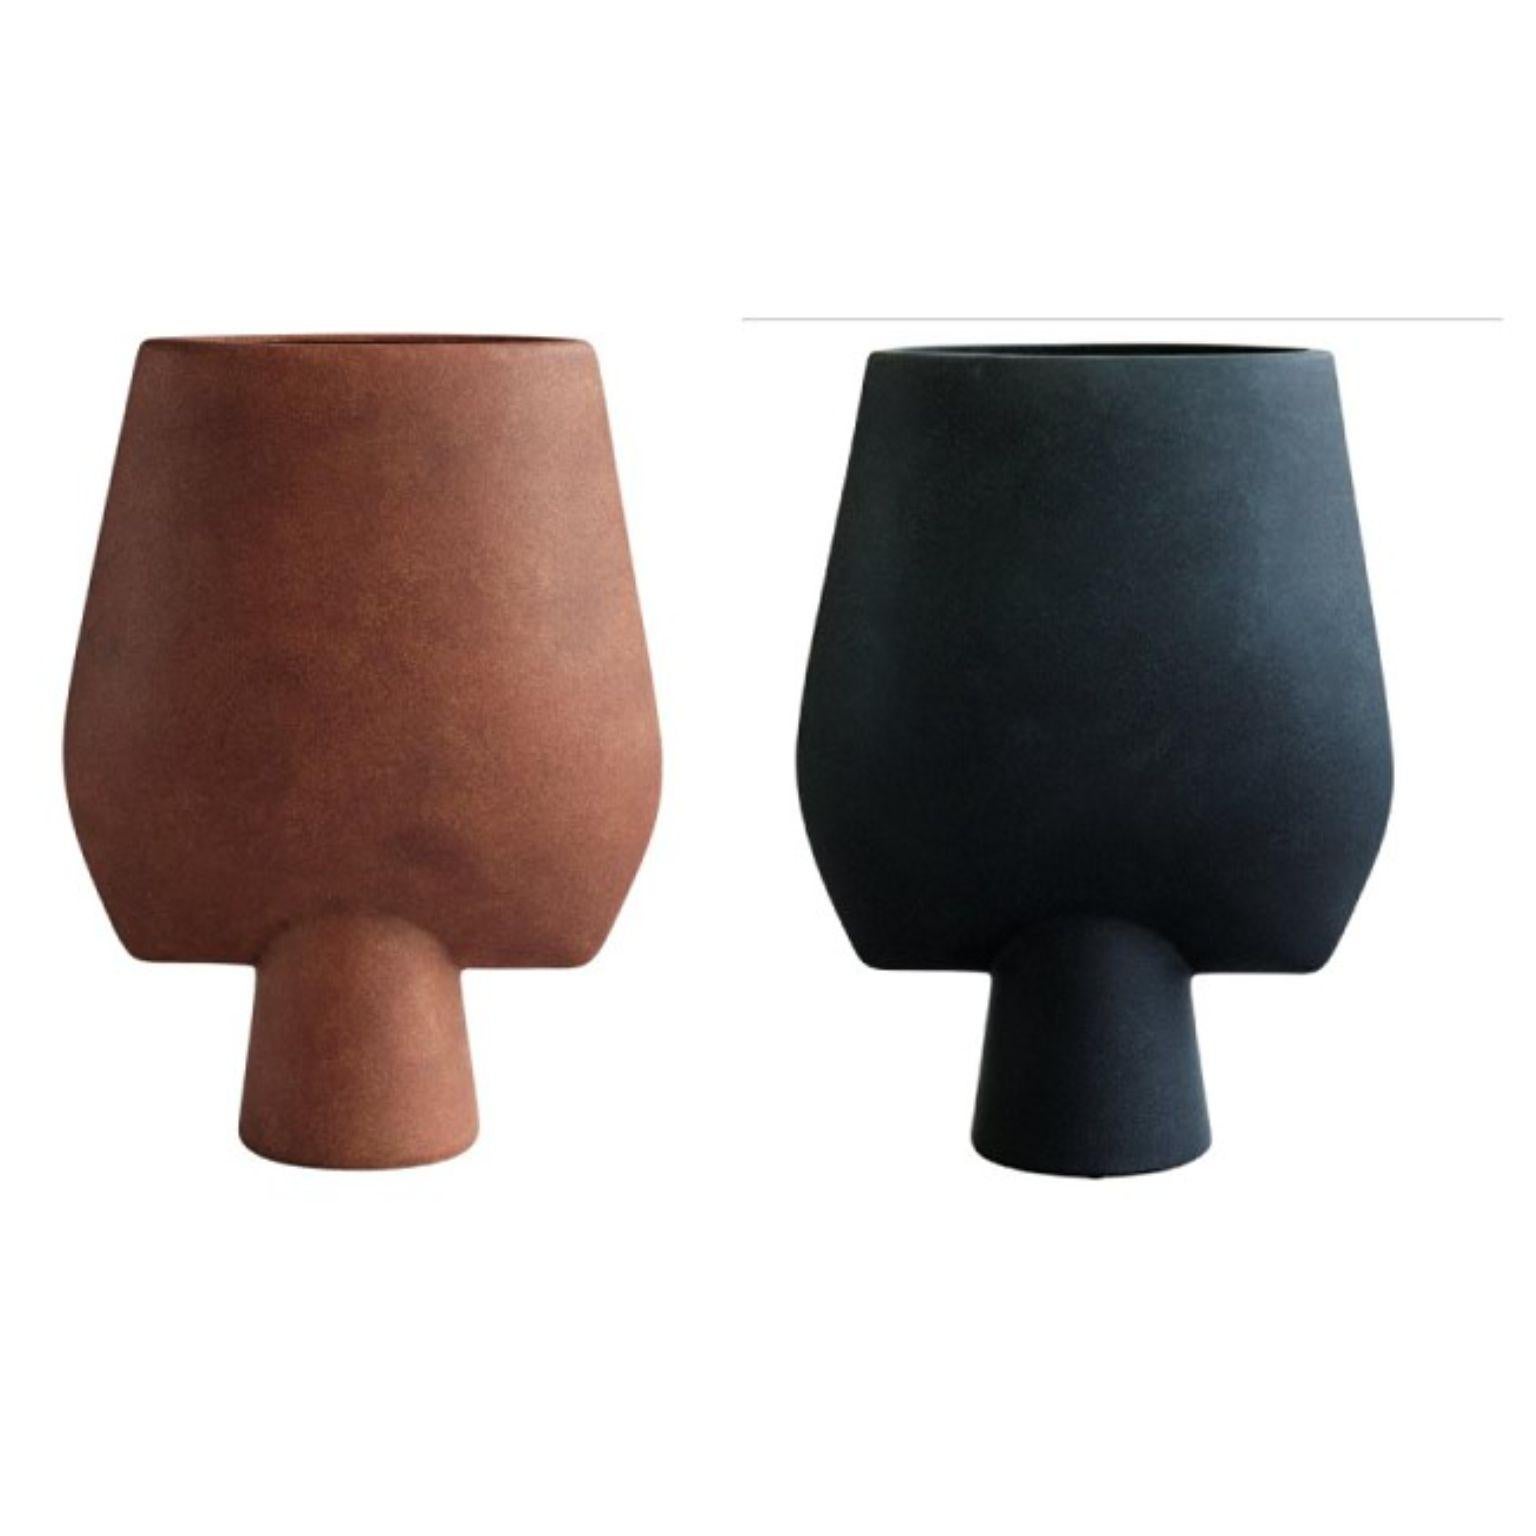 Set of 2 Big Sphere Vases Square by 101 Copenhagen.
Designed by Kristian Sofus Hansen & Tommy Hyldahl.
Dimensions: L33 / W16 / H43 cm.
Materials: Ceramic

The Sphere collection celebrates unique silhouettes and textures that makes an impact